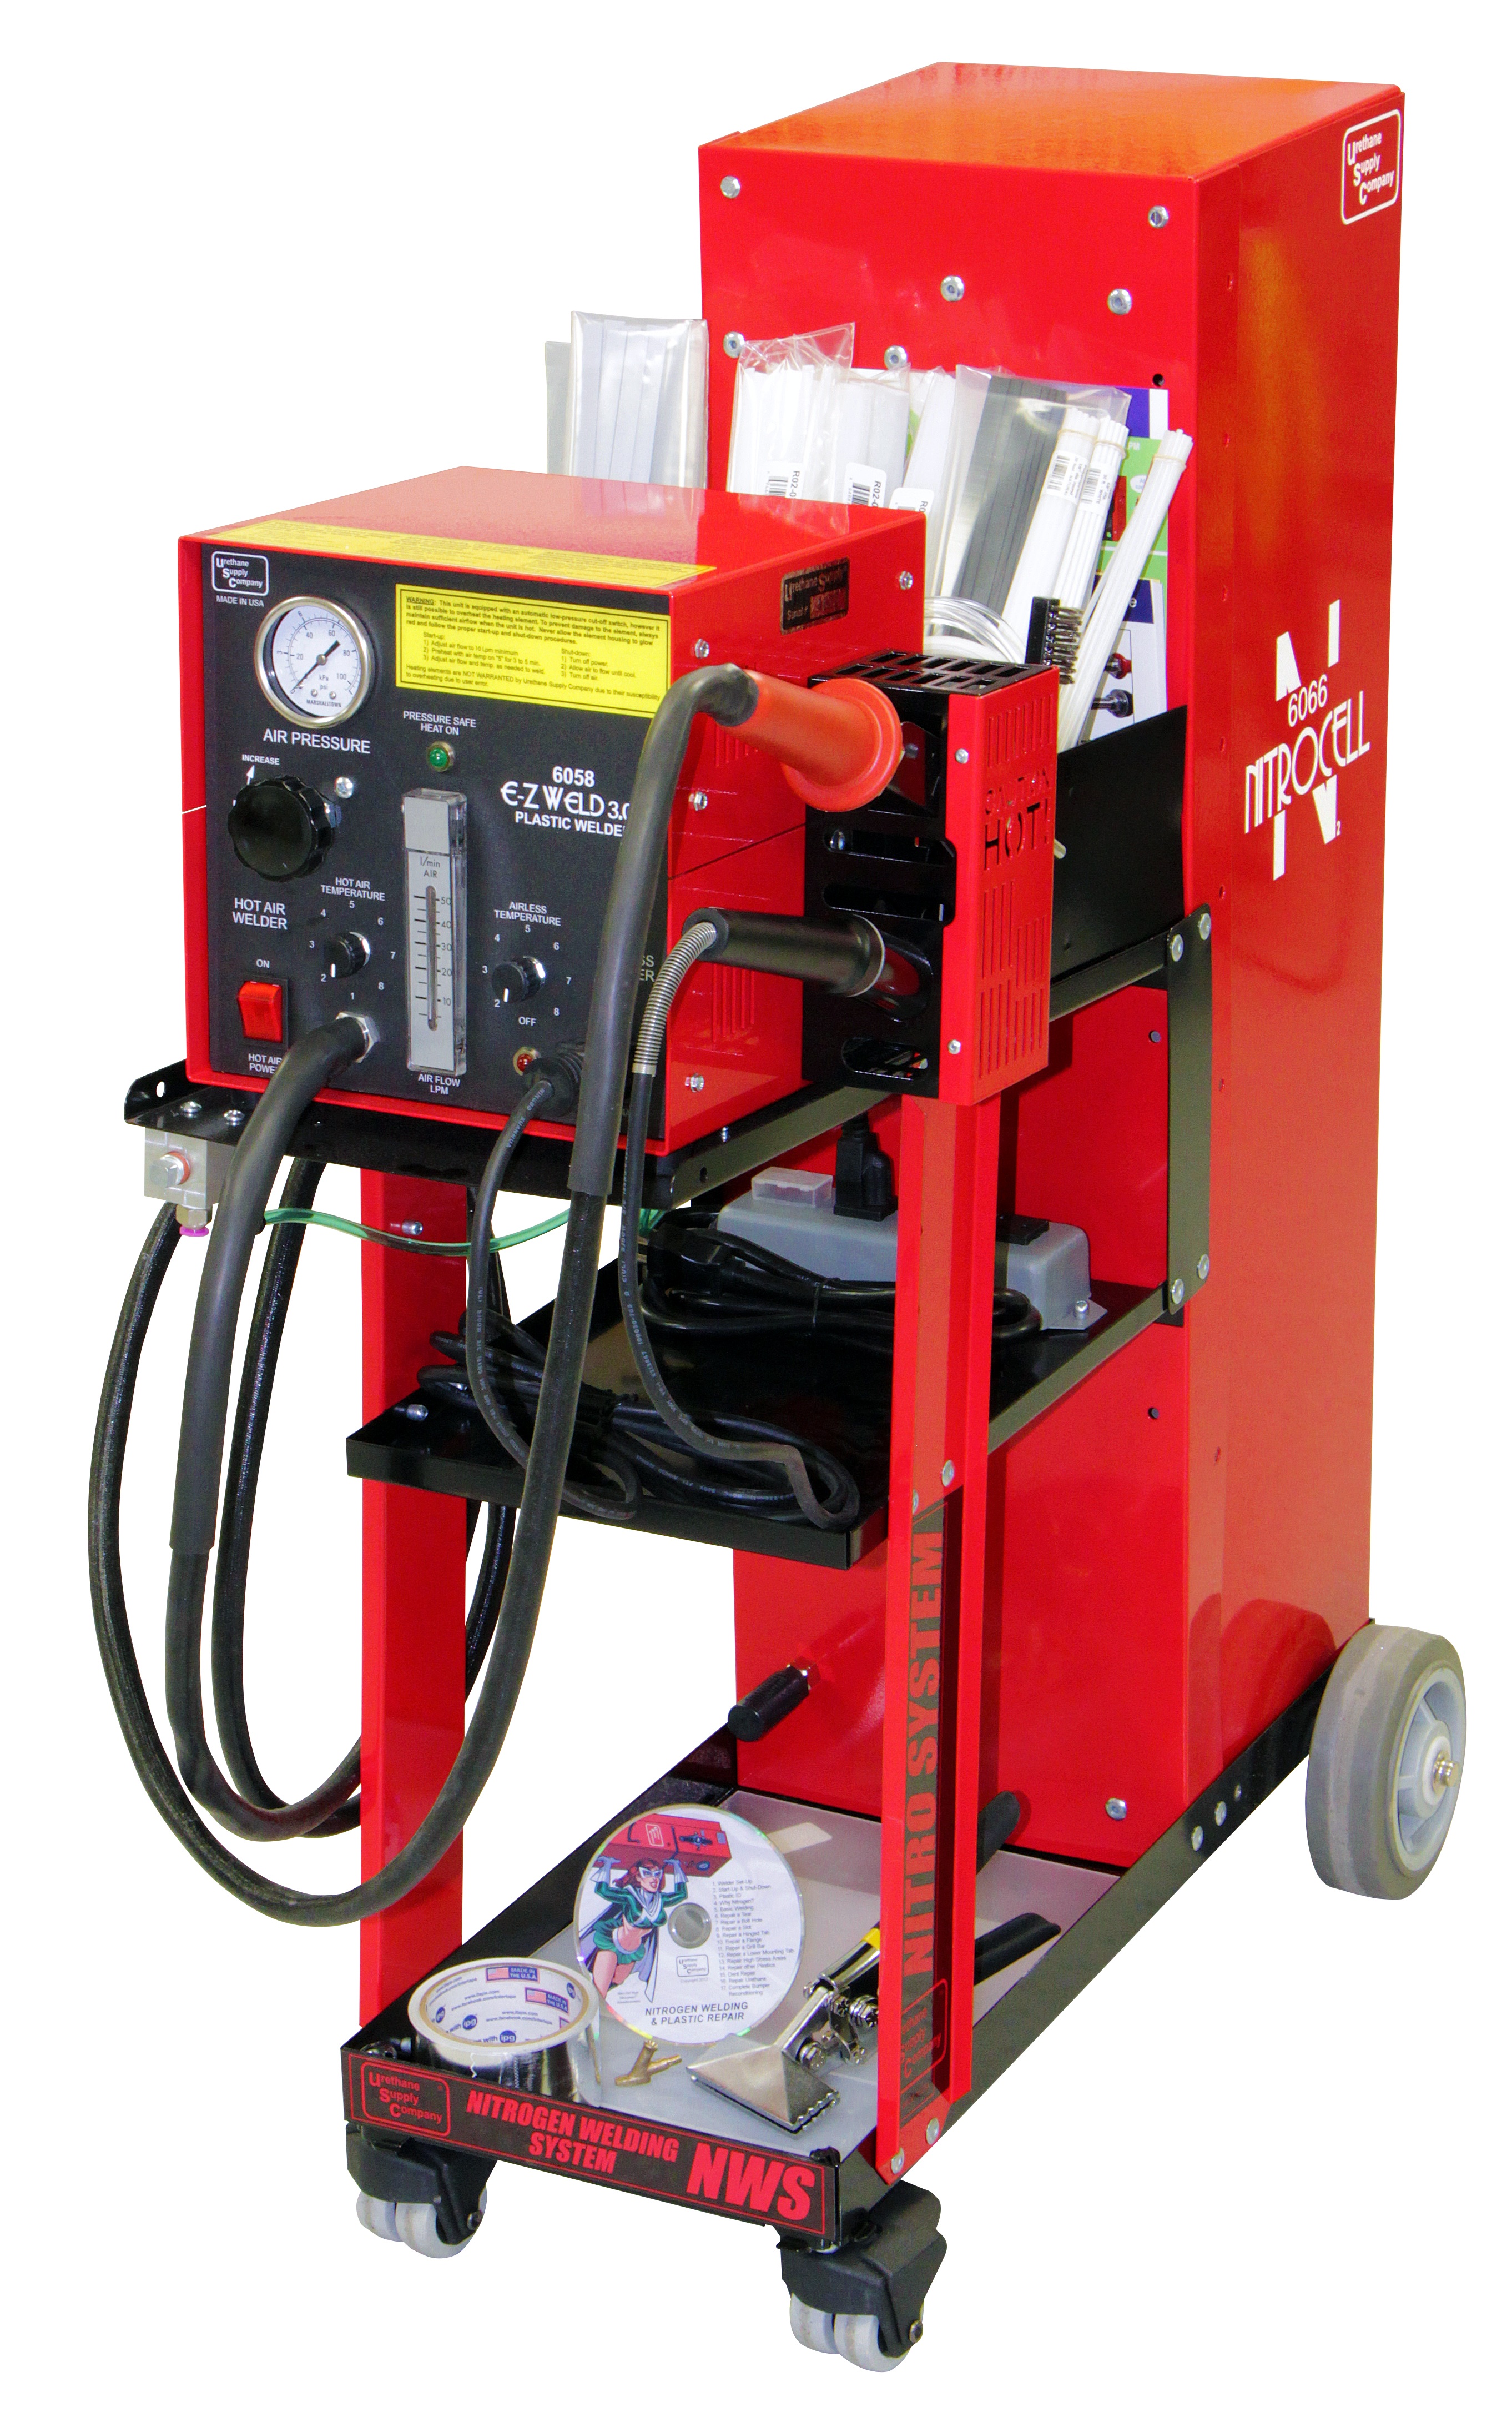 The new 6066-CG Nitrogen Plastic Welder will help collision specialists reduce cycle times and increase their opportunities to do more profitable labor-based repair of plastic components.